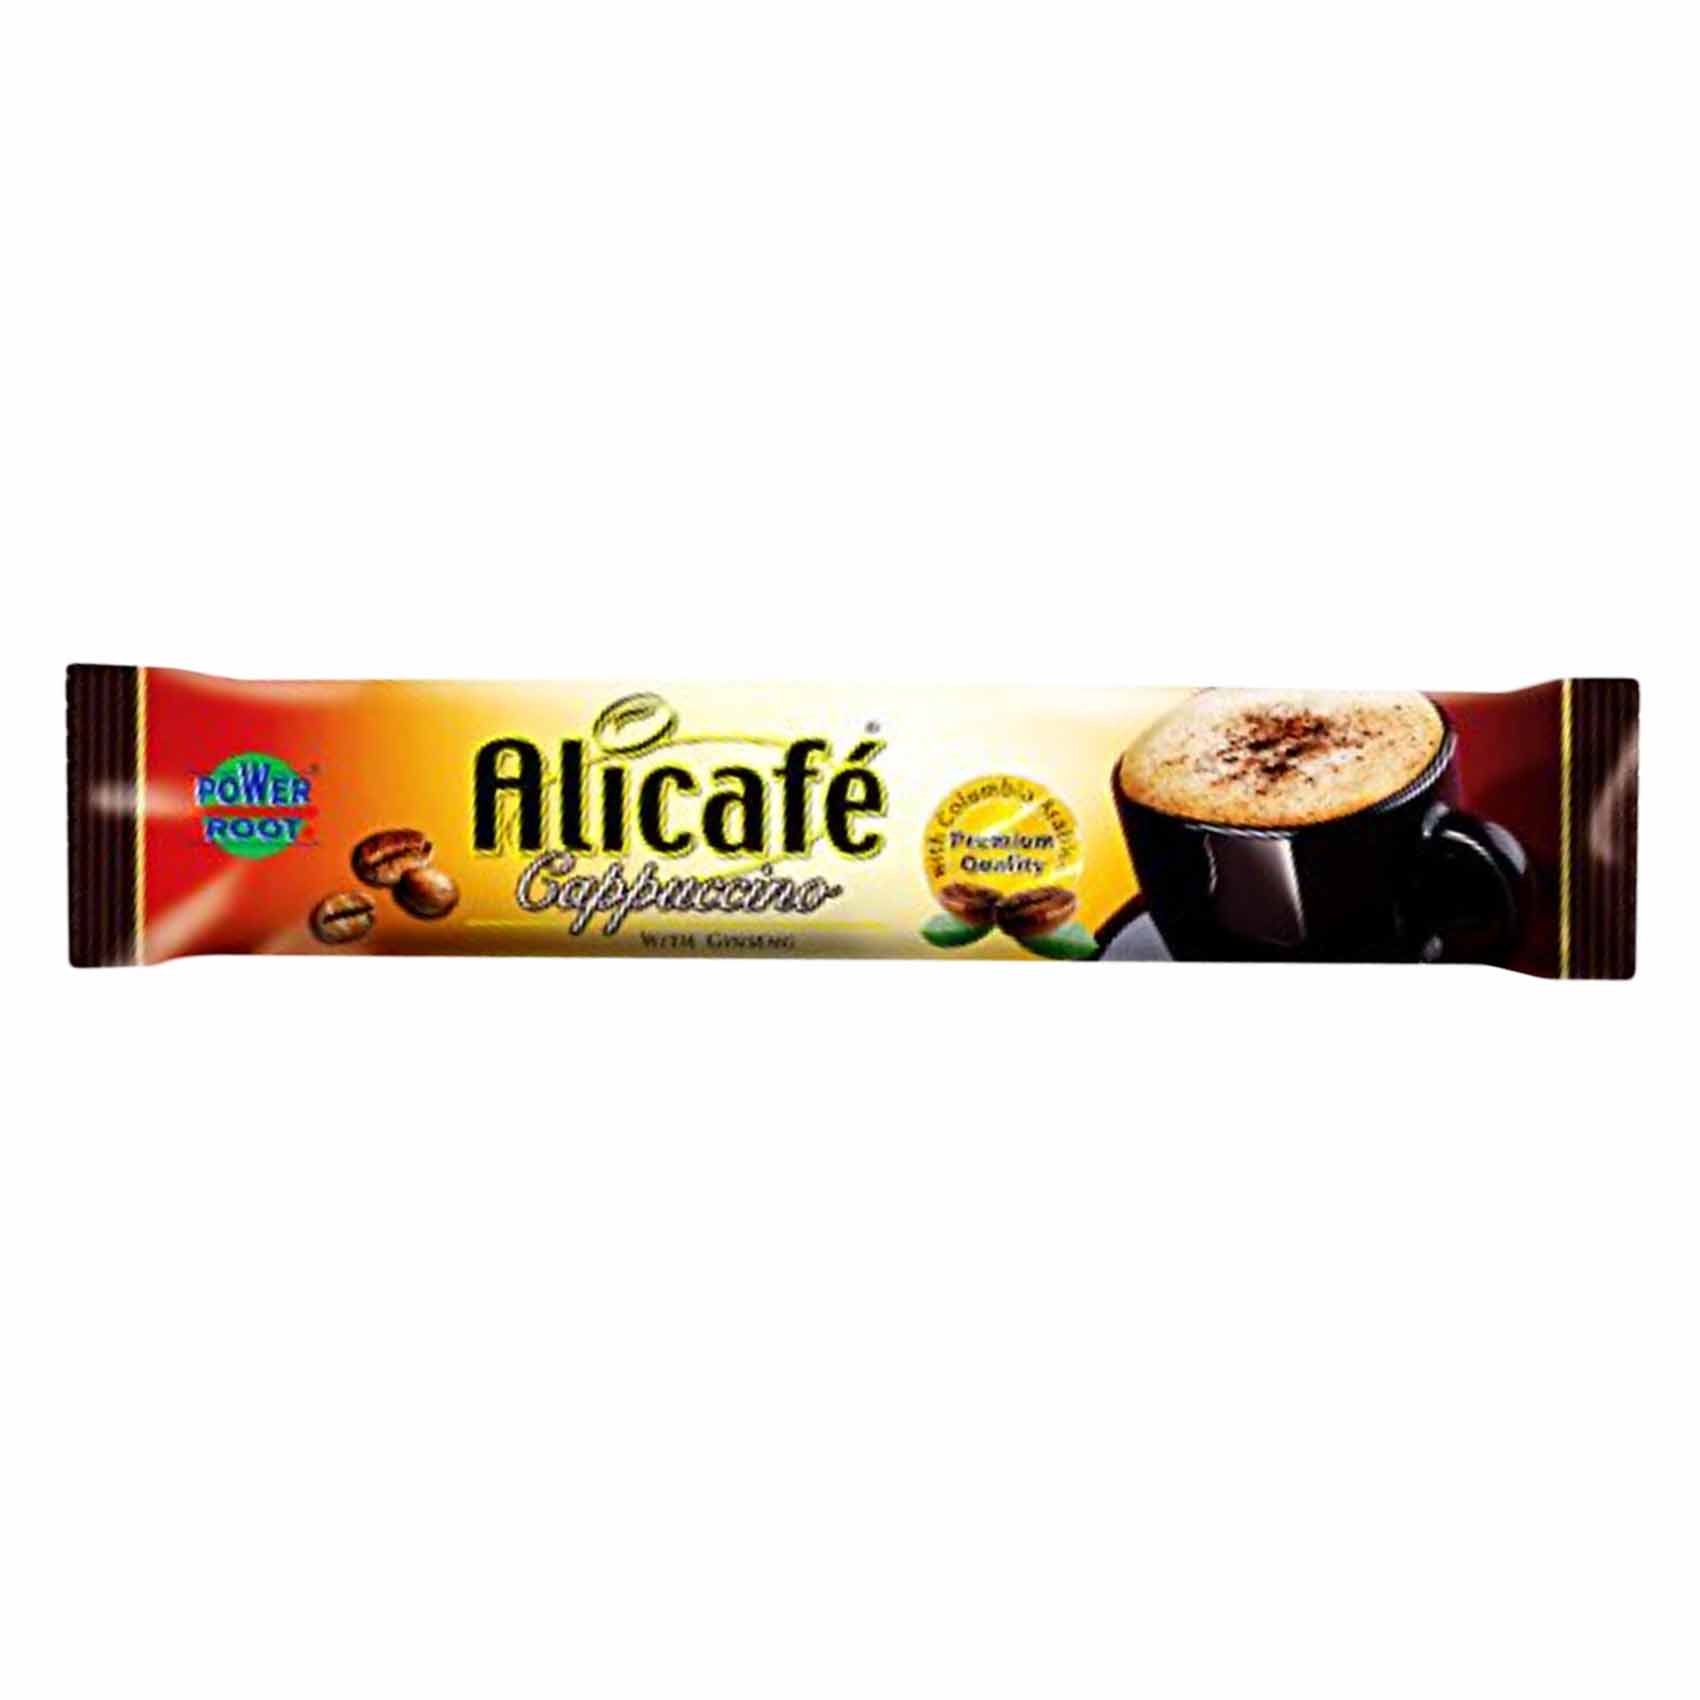 Alicafe Cappuccino Ginseng Instant Coffee 20g